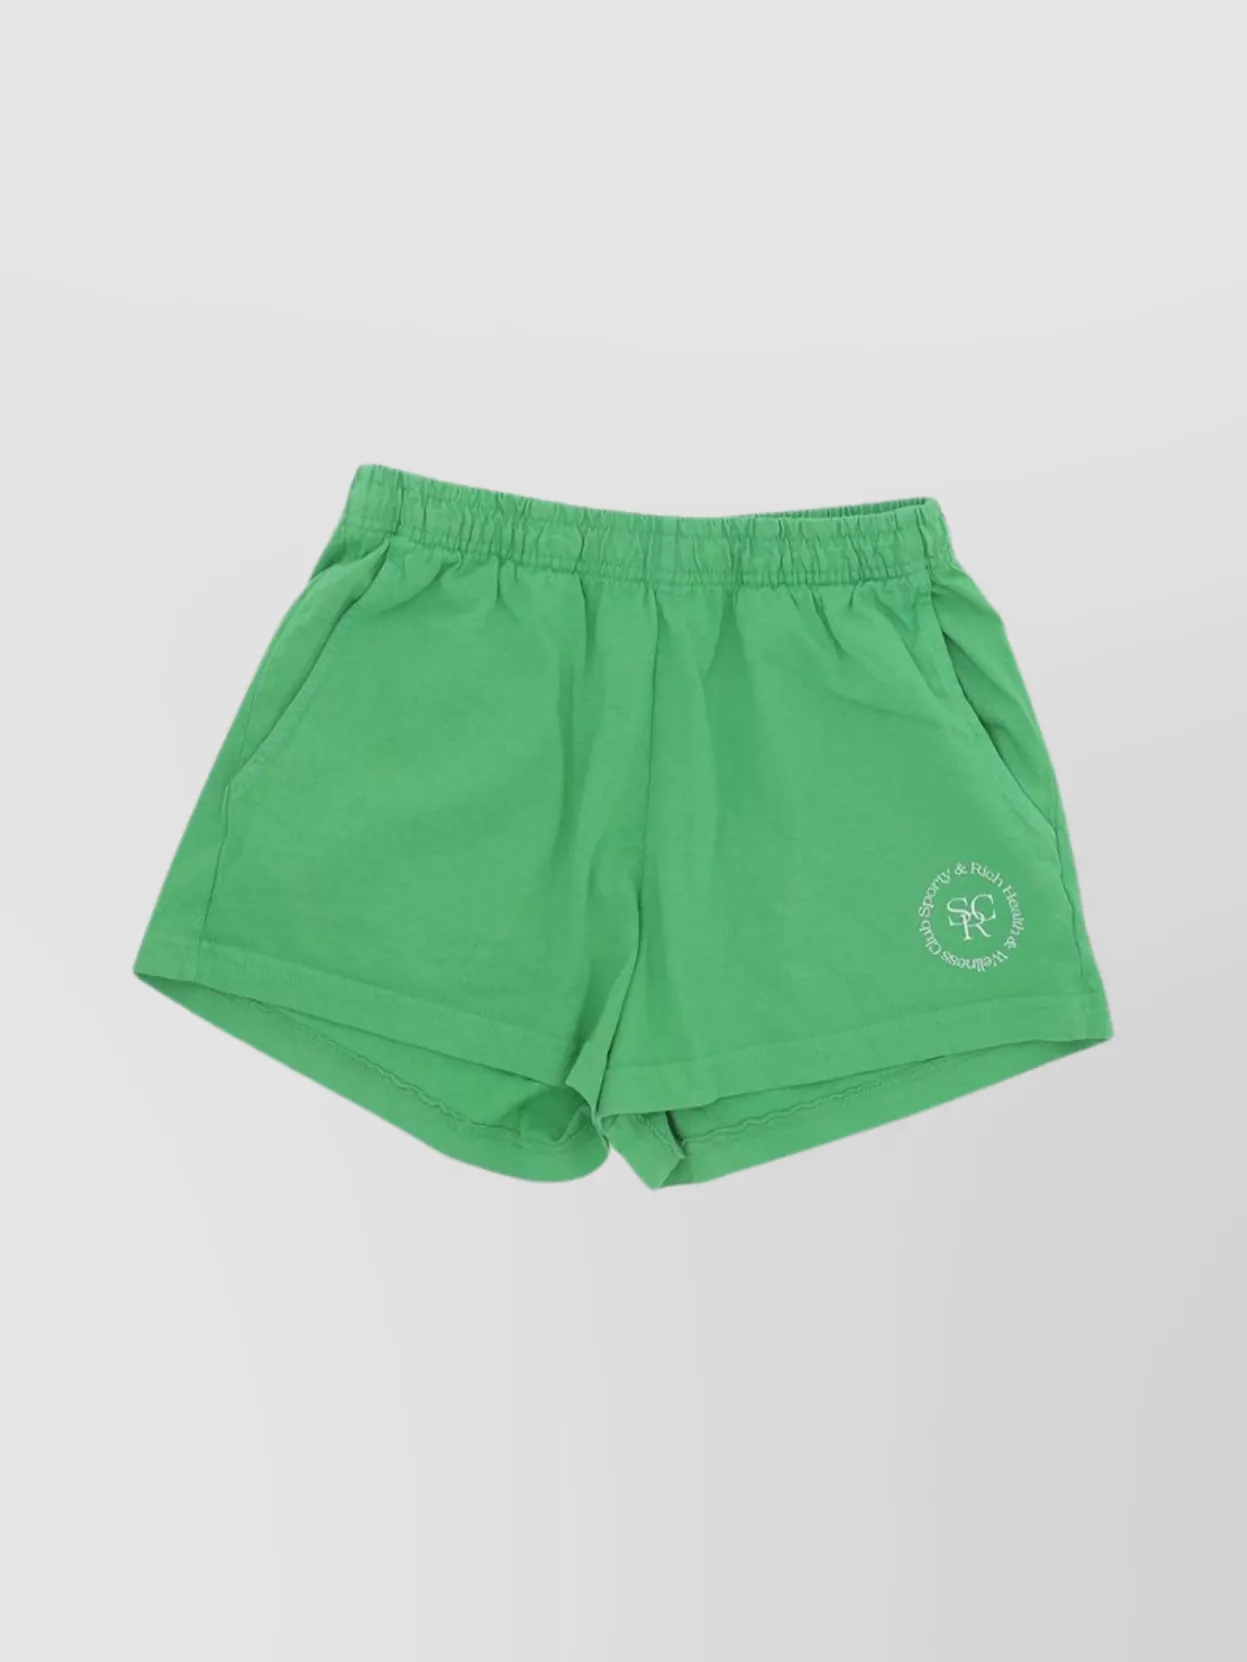 Shop Sporty And Rich Disco Shorts With Back Pocket And Elastic Waistband